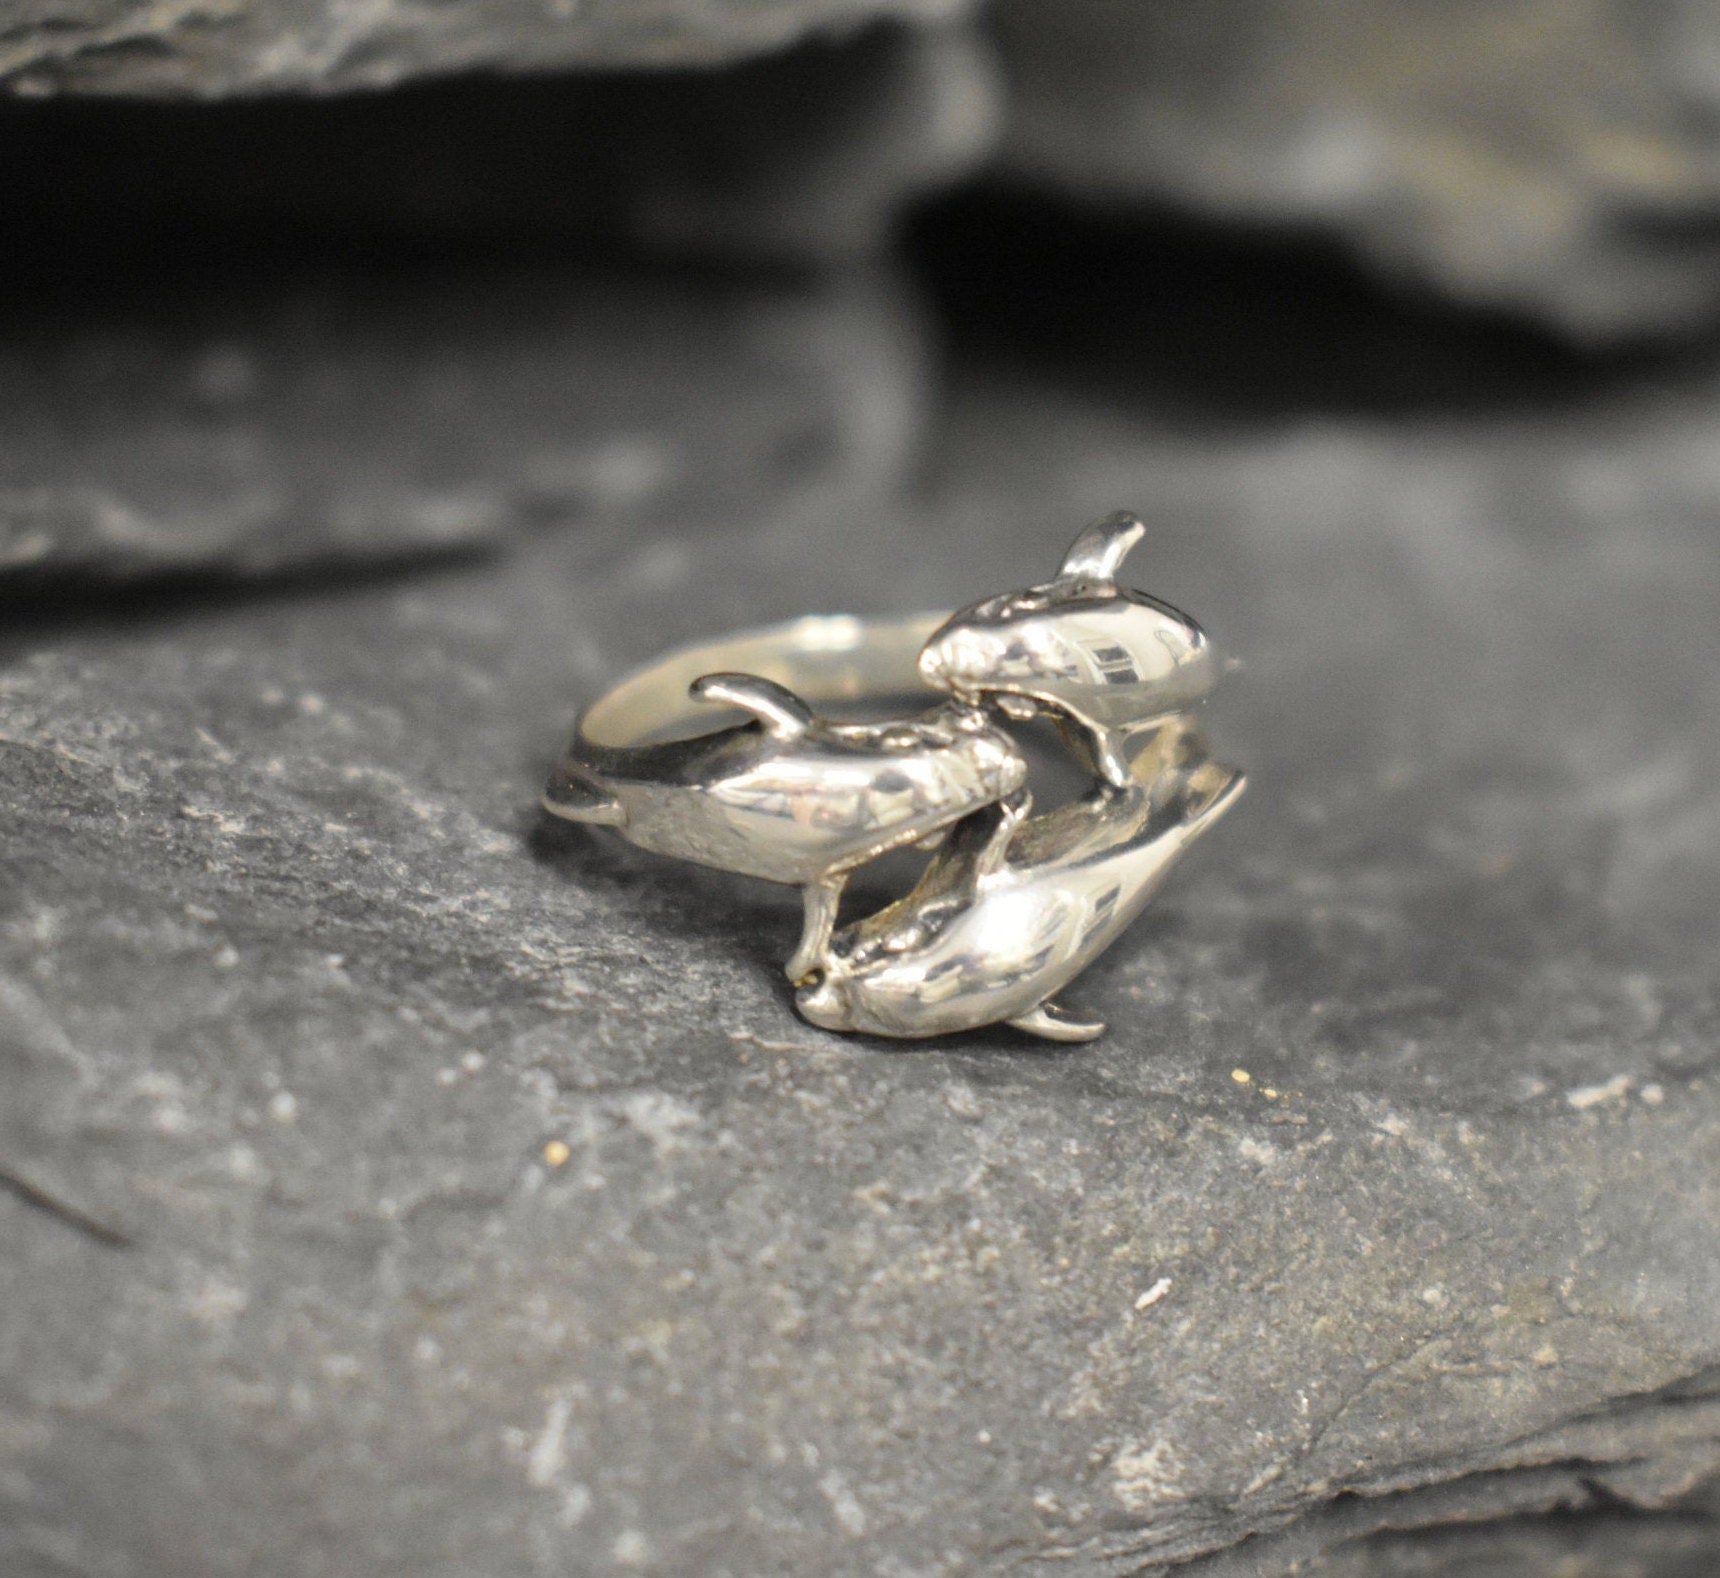 Dolphin Ring, Silver Dolphin Ring, Solid Silver Ring, Small Dolphin Ring, Animal Ring, Silver Artistic Ring, Sterling Silver Ring, Silver